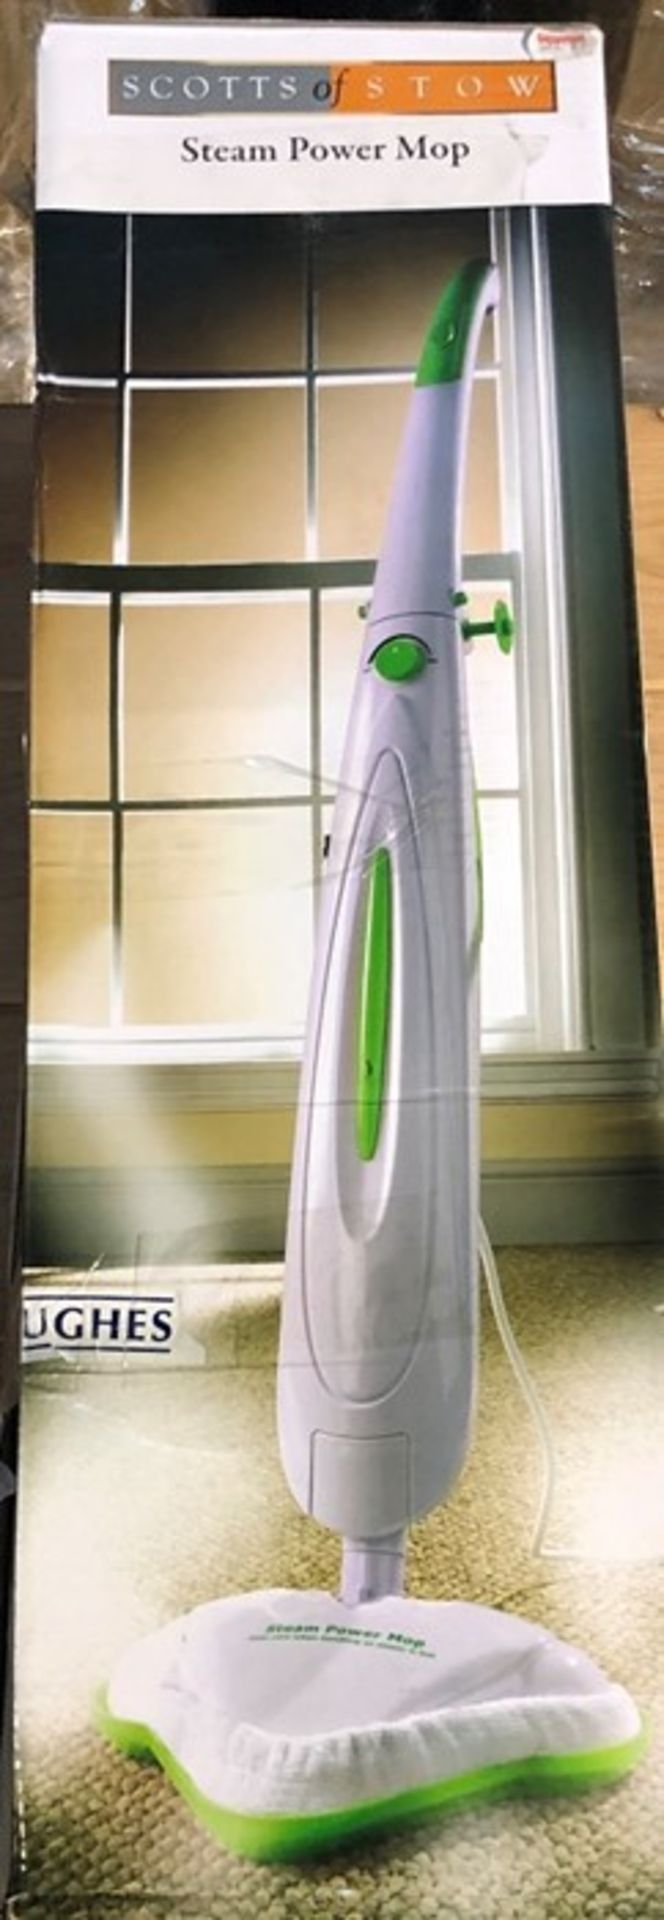 1 BOXED SCOTTS OF STOW STEAM POWER MOP / RRP £34.99 (PUBLIC VIEWING AVAILABLE) - Image 3 of 3